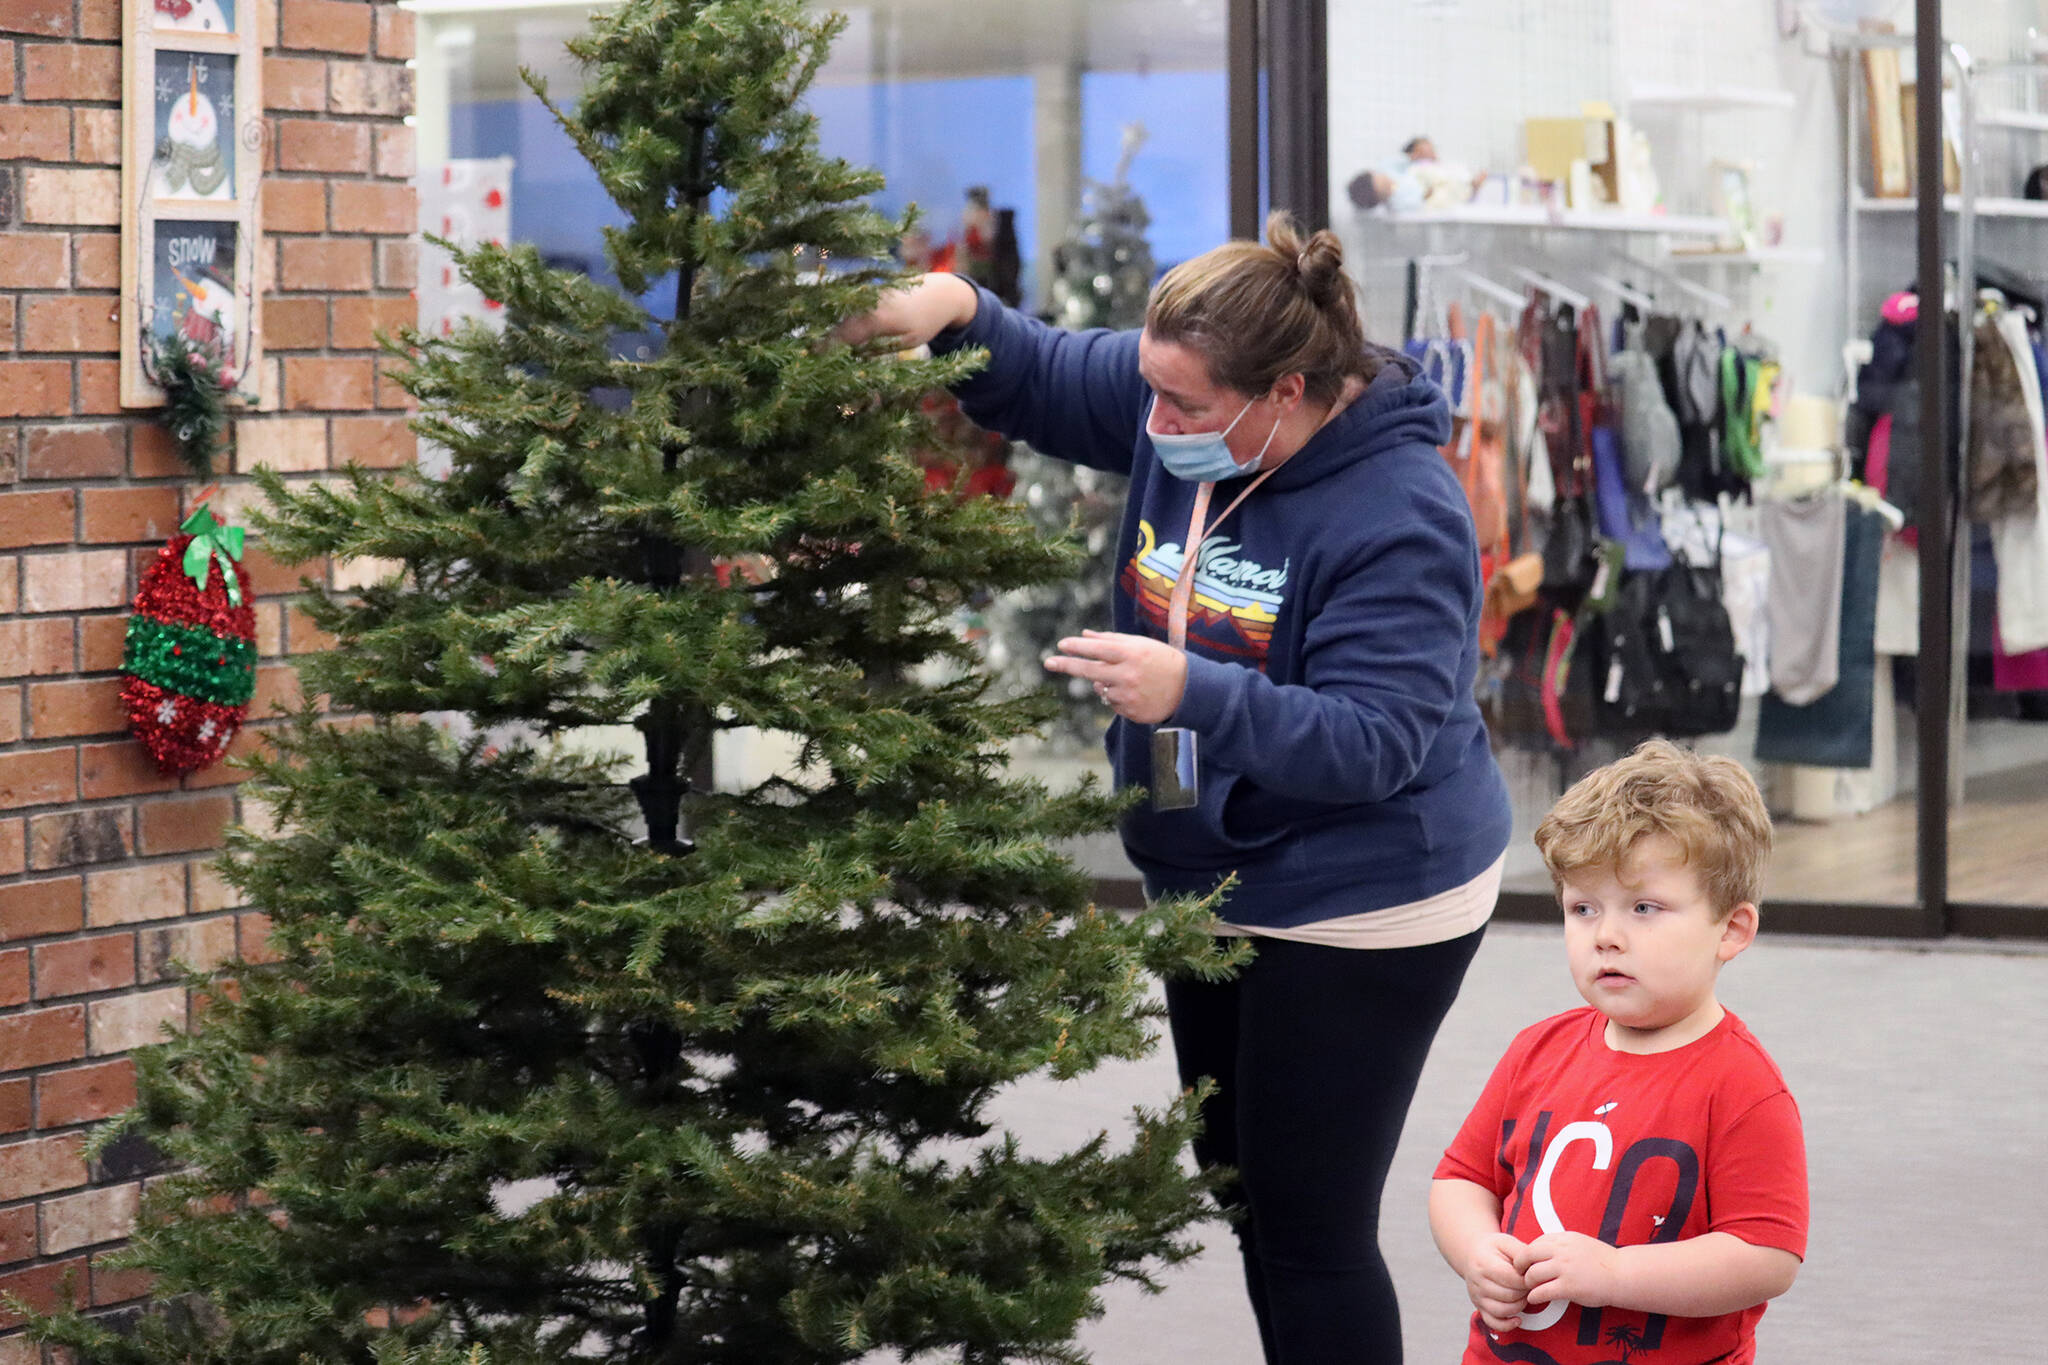 Sandra Mulkey and her son Caleb, 3, set up a Christmas tree at the Mendenhall Mall on Nov. 24. Mulkey is kicking off a toy drive for foster children. She said that she has not collected toys at the Mendenhall Mall for the last few years because of low traffic. However, she said the increased traffic at the now mostly-full mall prompted her to set up there. (Dana Zigmund/Juneau Empire)